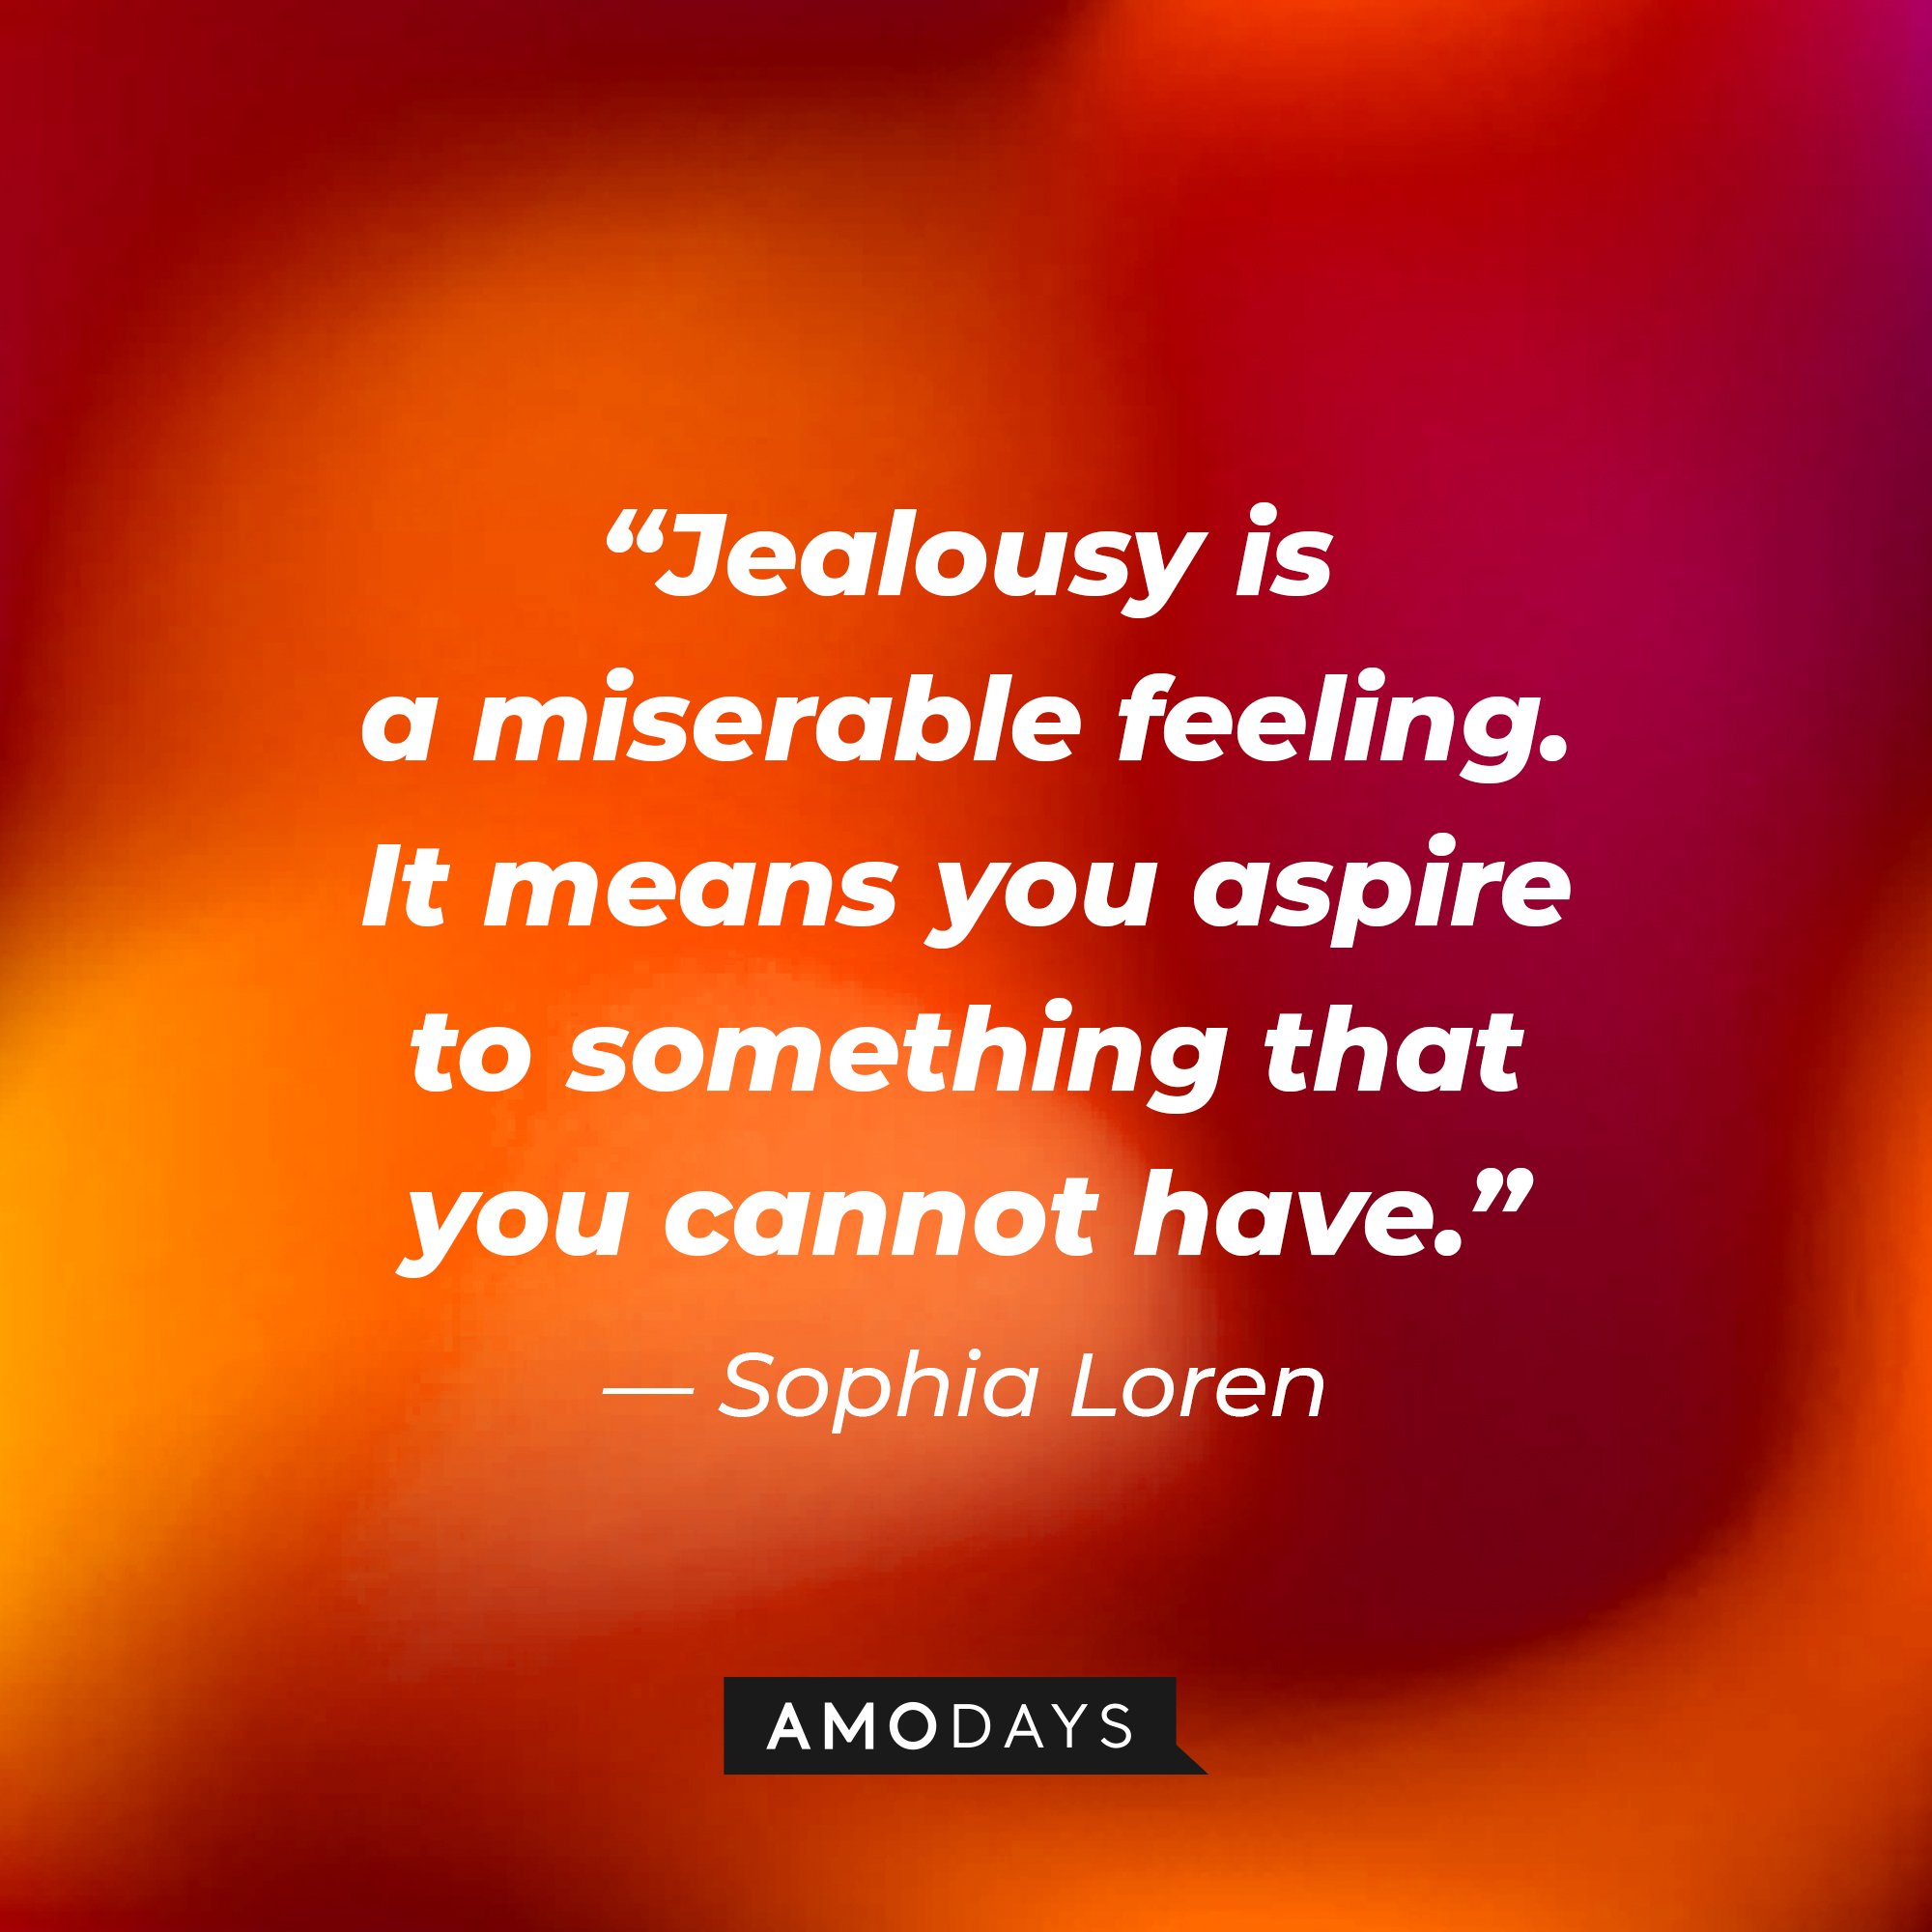 Sophia Loren's quote: "Jealousy is a miserable feeling. It means you aspire to something that you cannot have." | Image: AmoDays